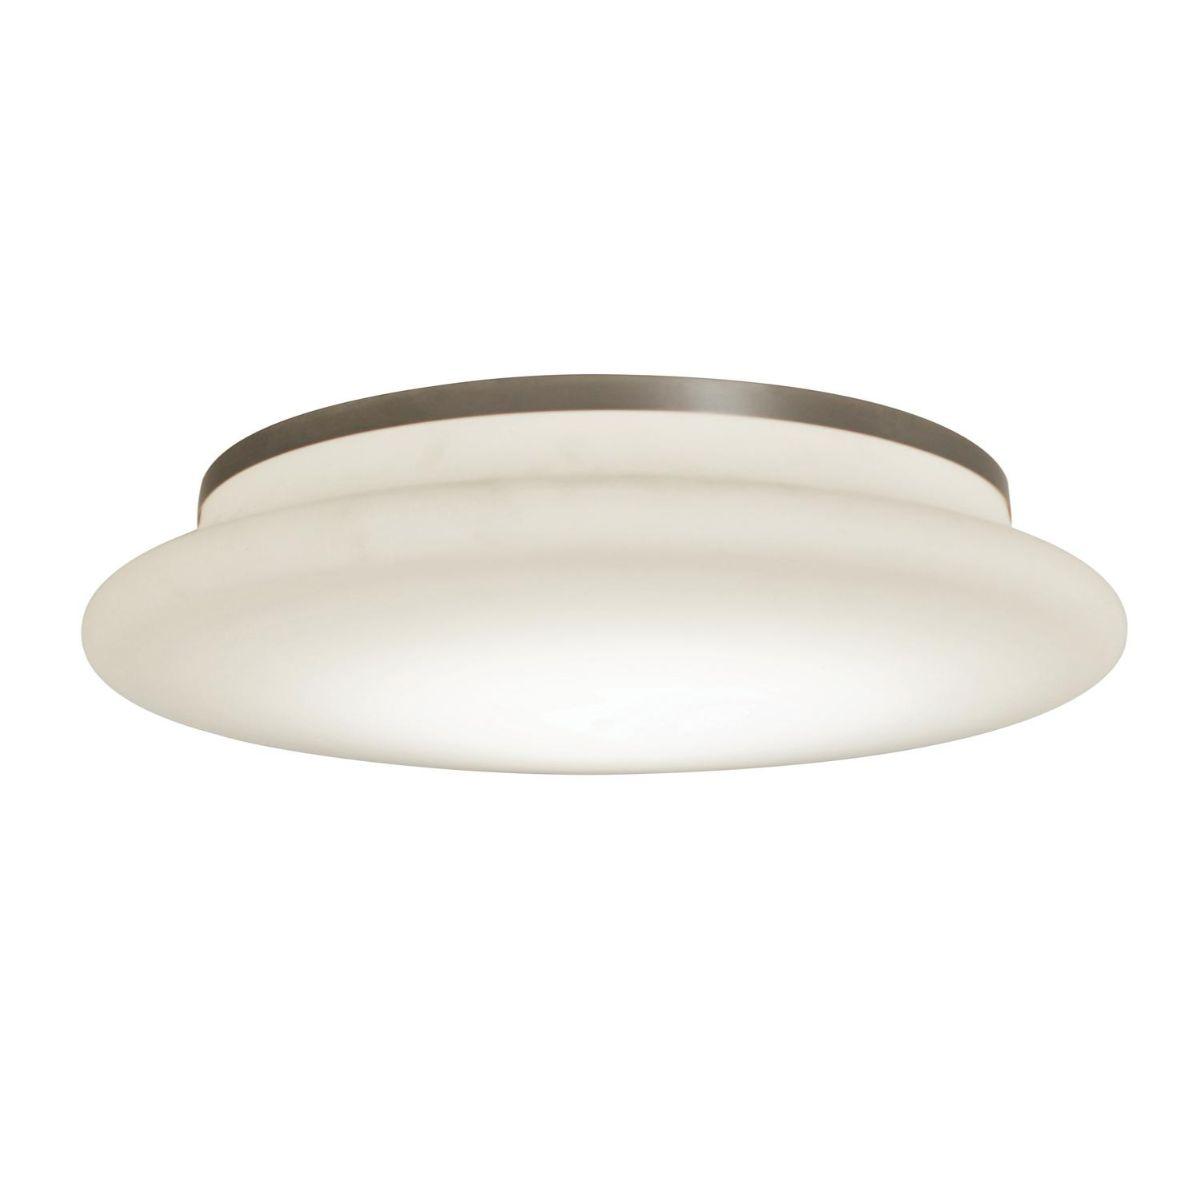 Sutton 18 in. LED Flush Mount Light with Motion Sensor Selectable CCT Satin Nickel Finish